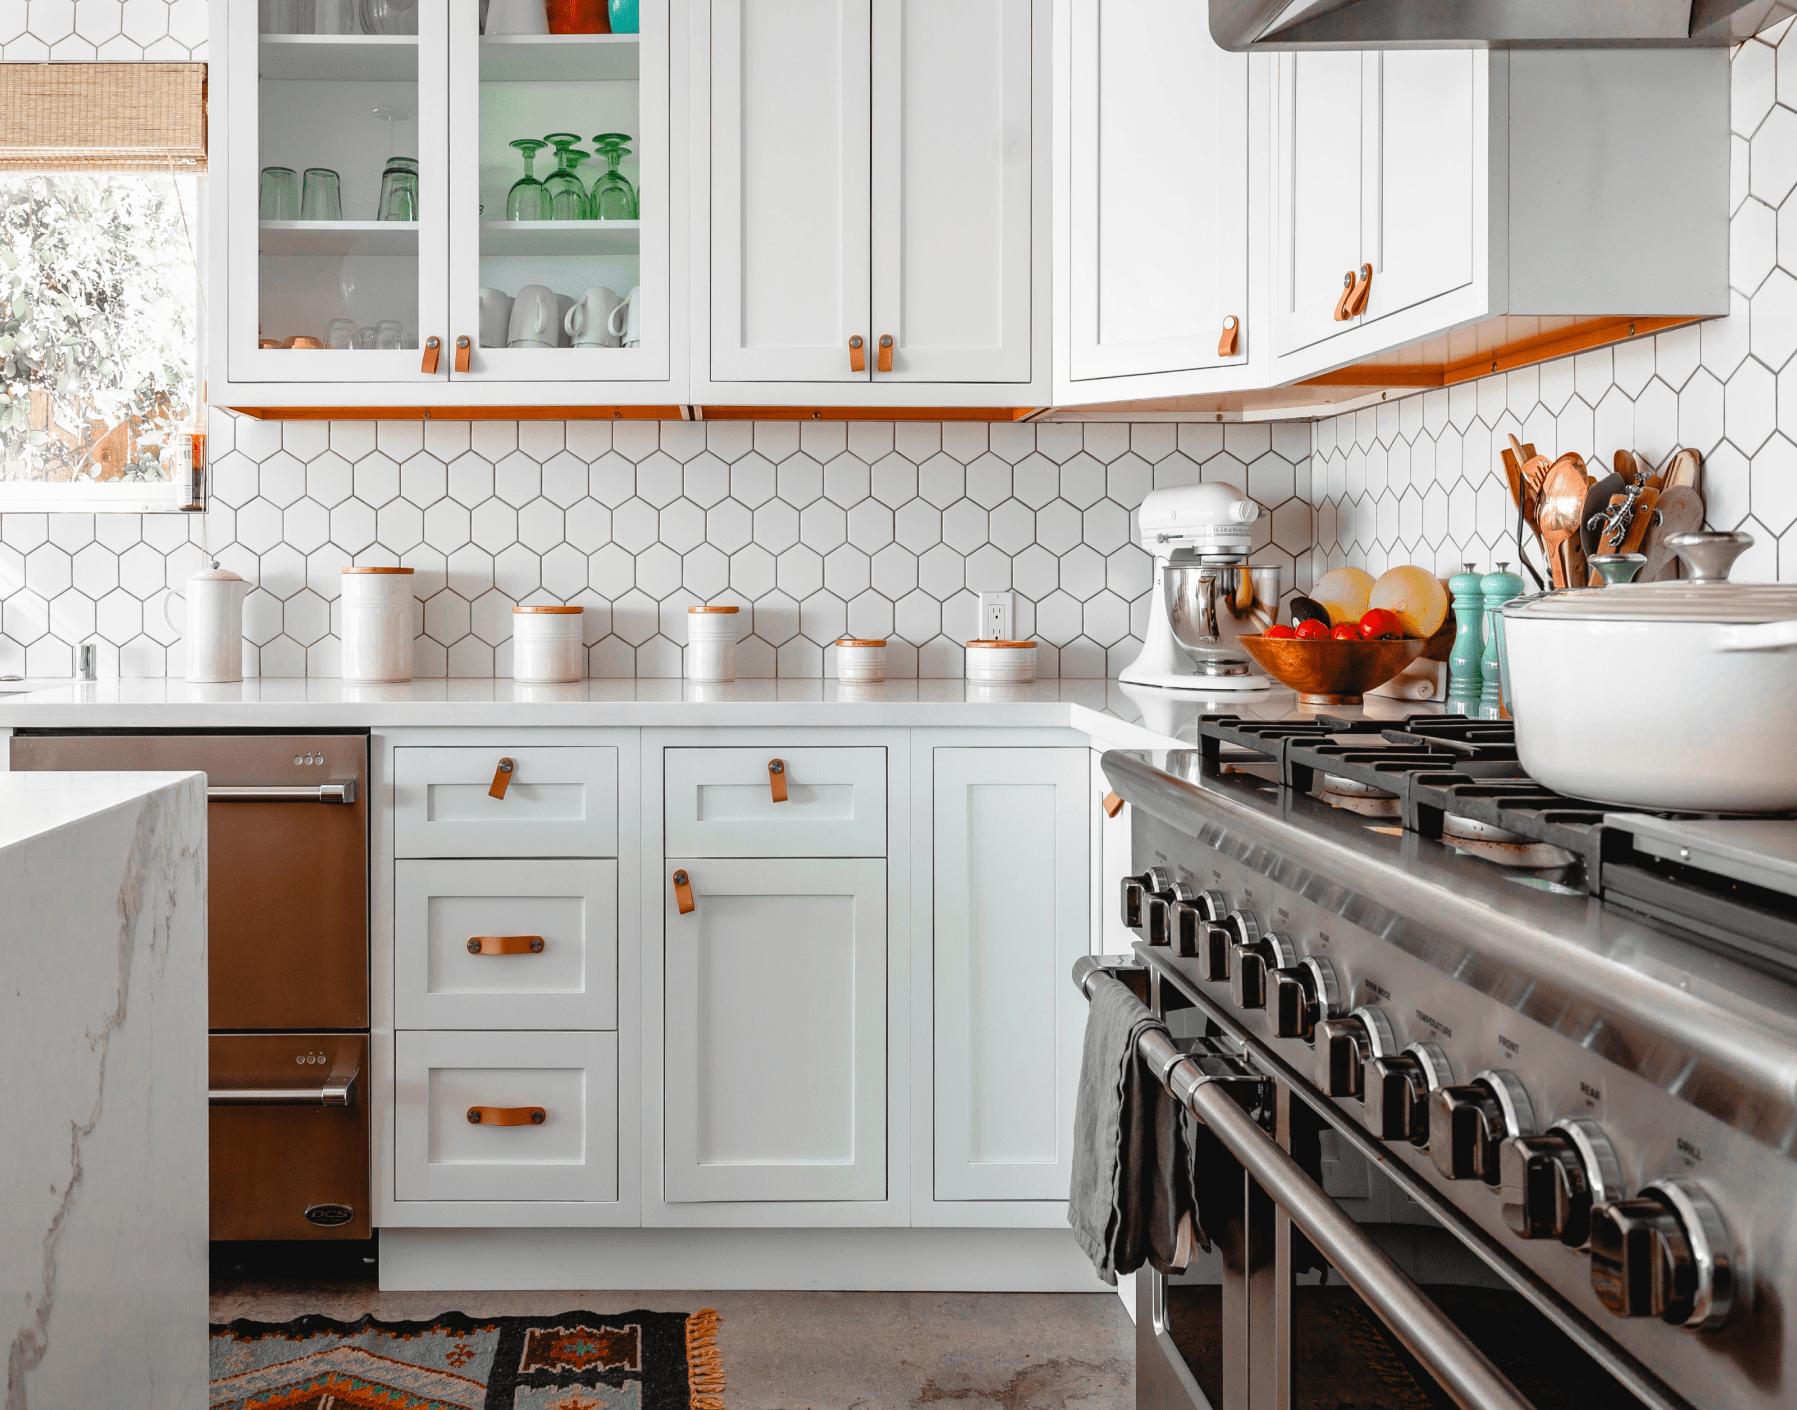 contemporary kitchen with honeycomb backsplash and white cabinetry min